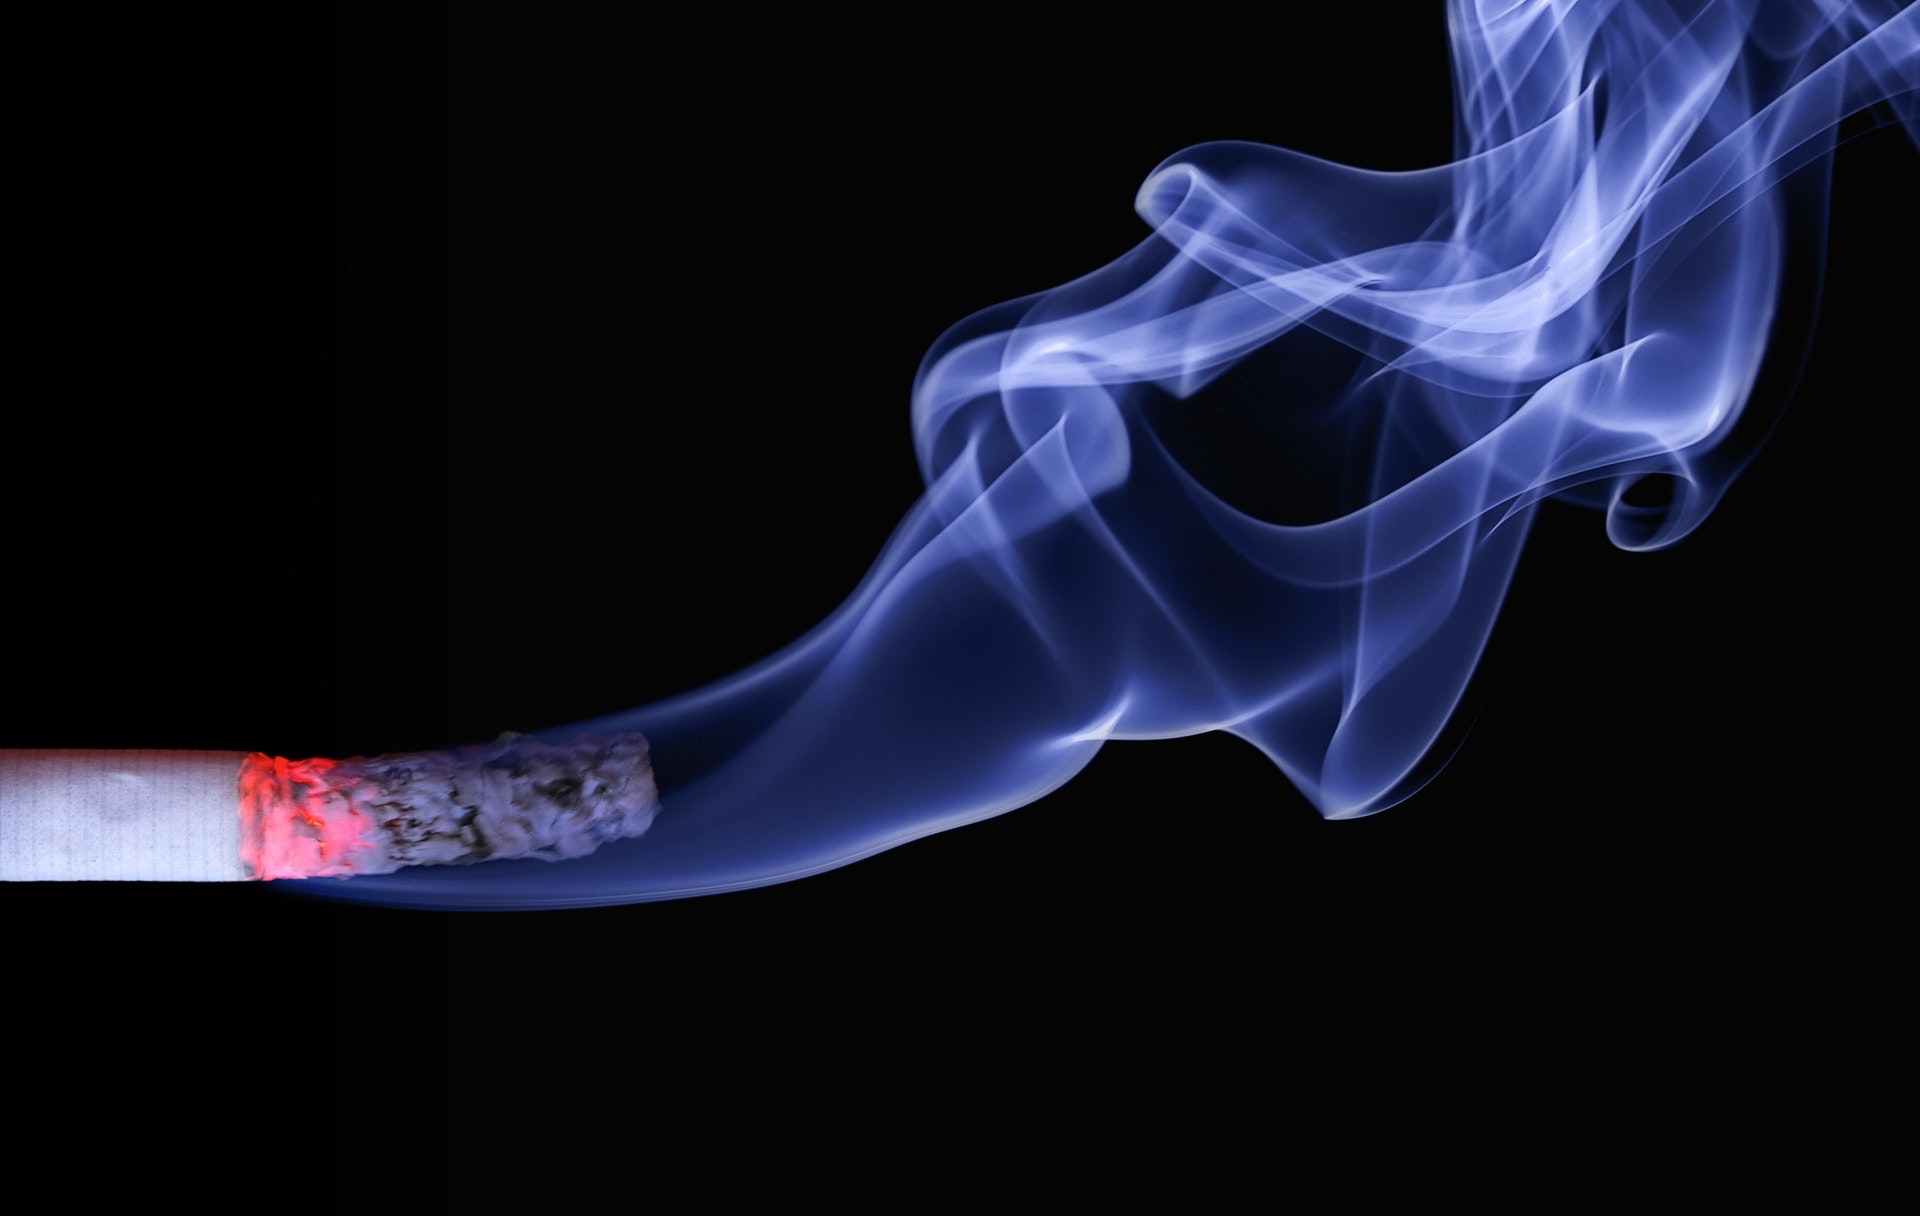 Council support to make generation of smokefree a reality